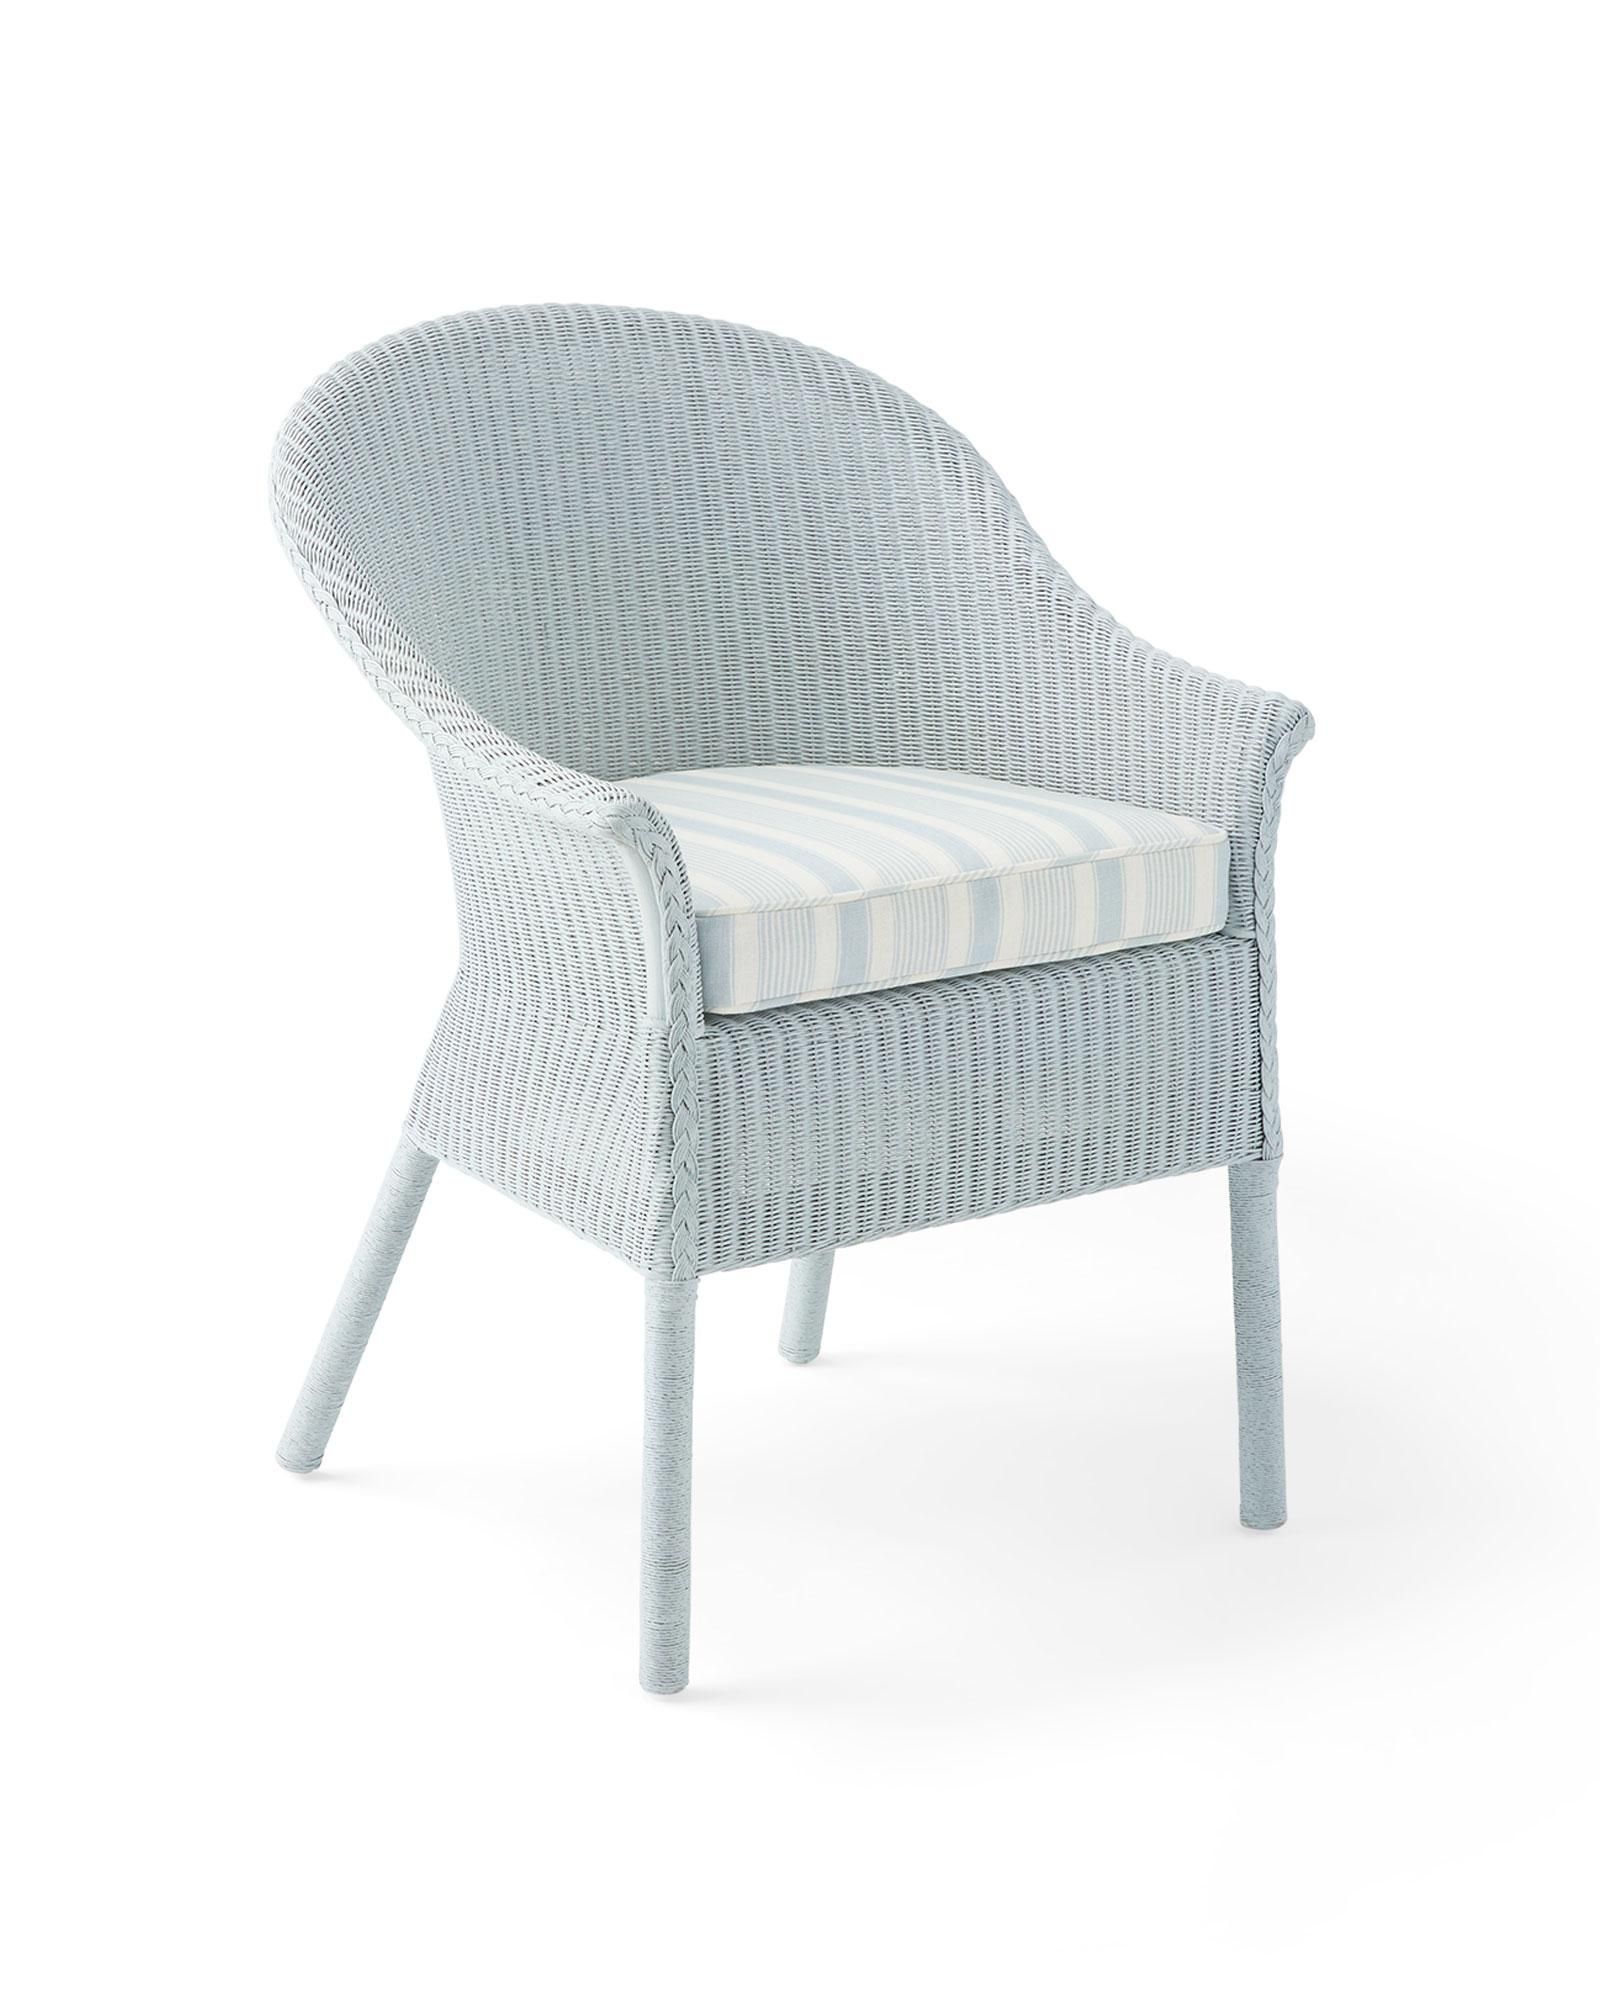 Surrey Armchair | Serena and Lily